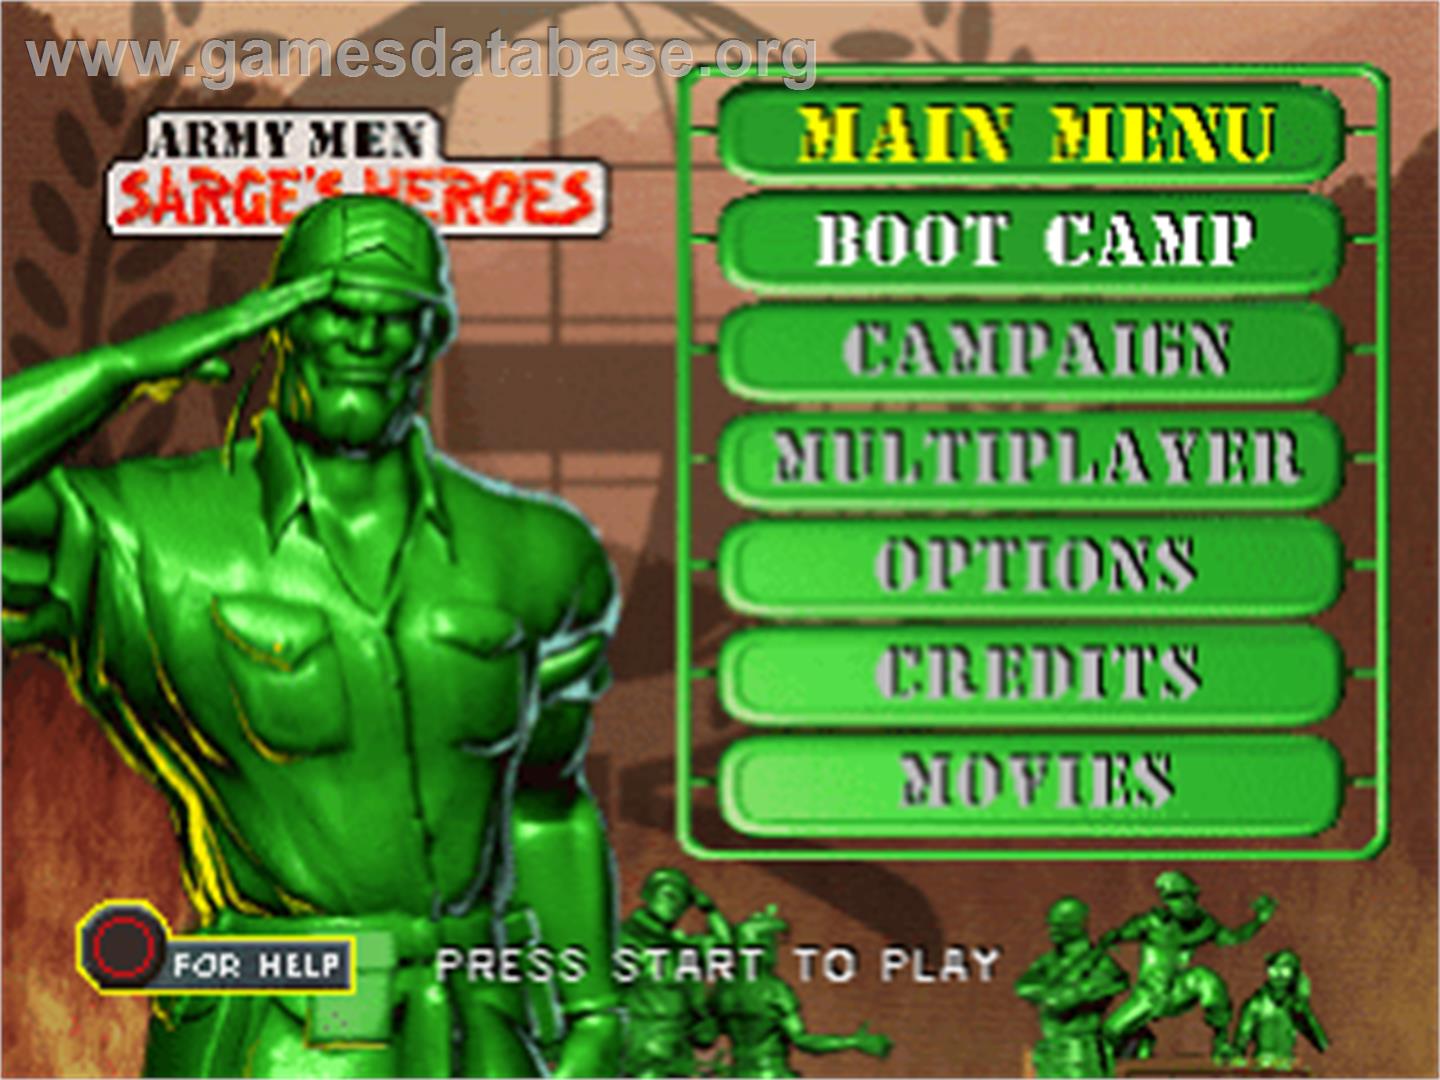 Army Men: Sarge's Heroes - Sony Playstation - Artwork - Title Screen